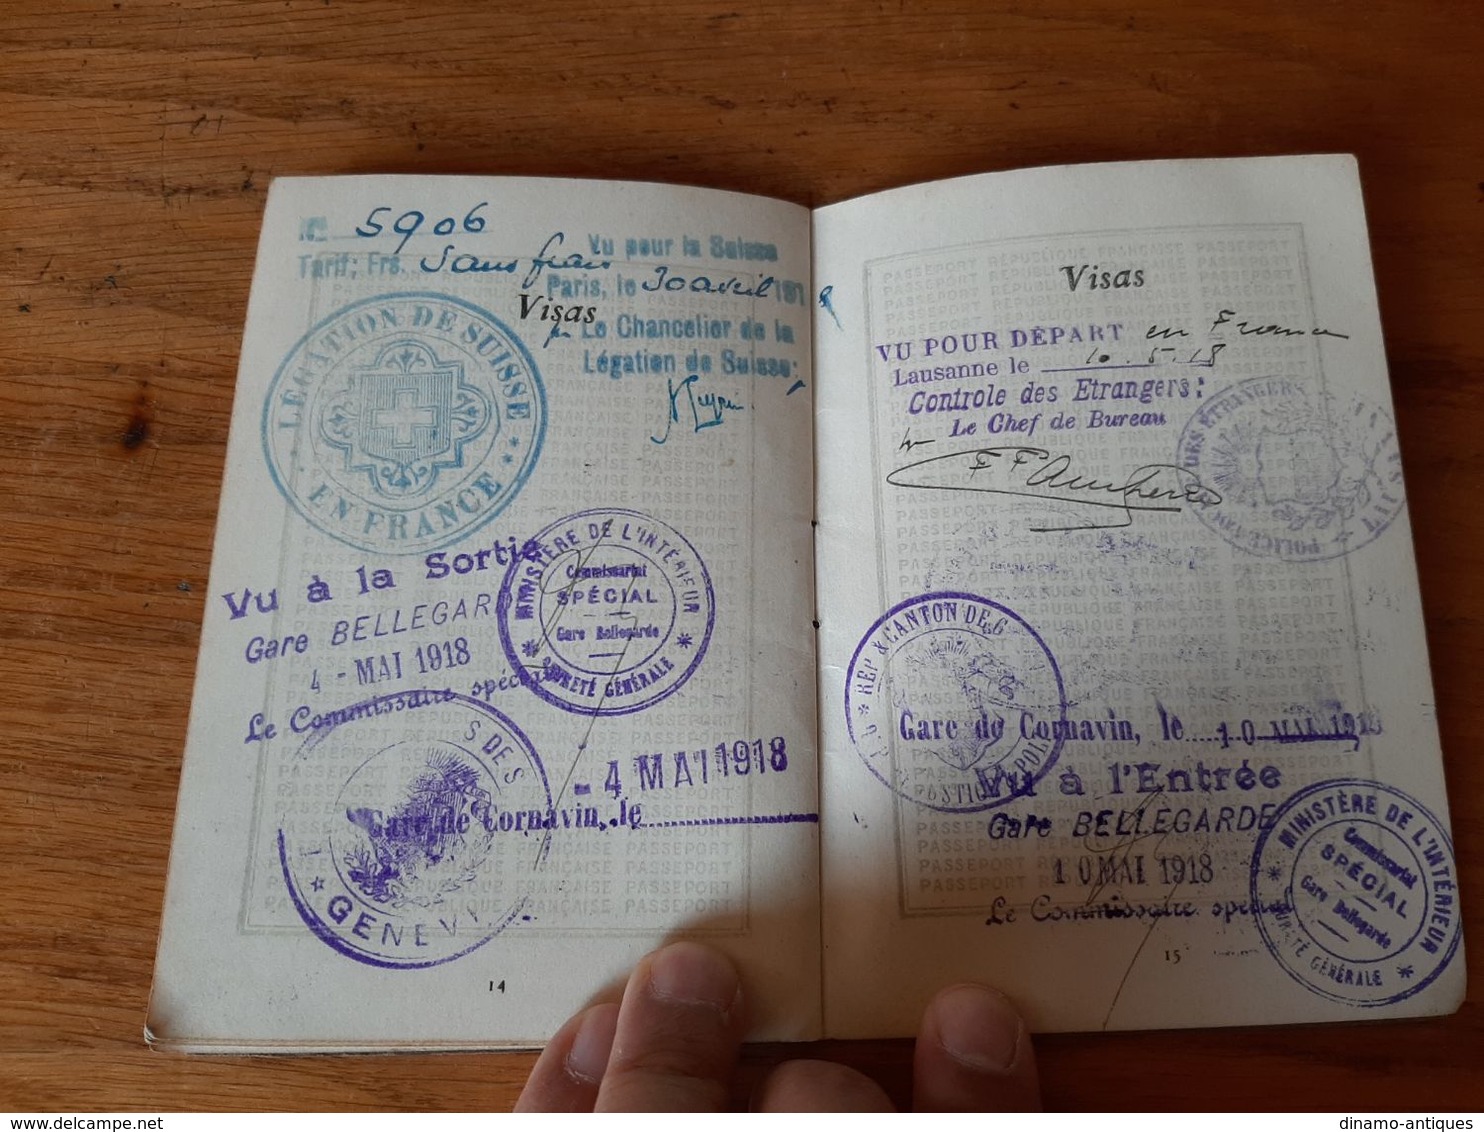 1917 France passport passeport issued in Paris for travel to Switzerland issued for industrial president of court Seine